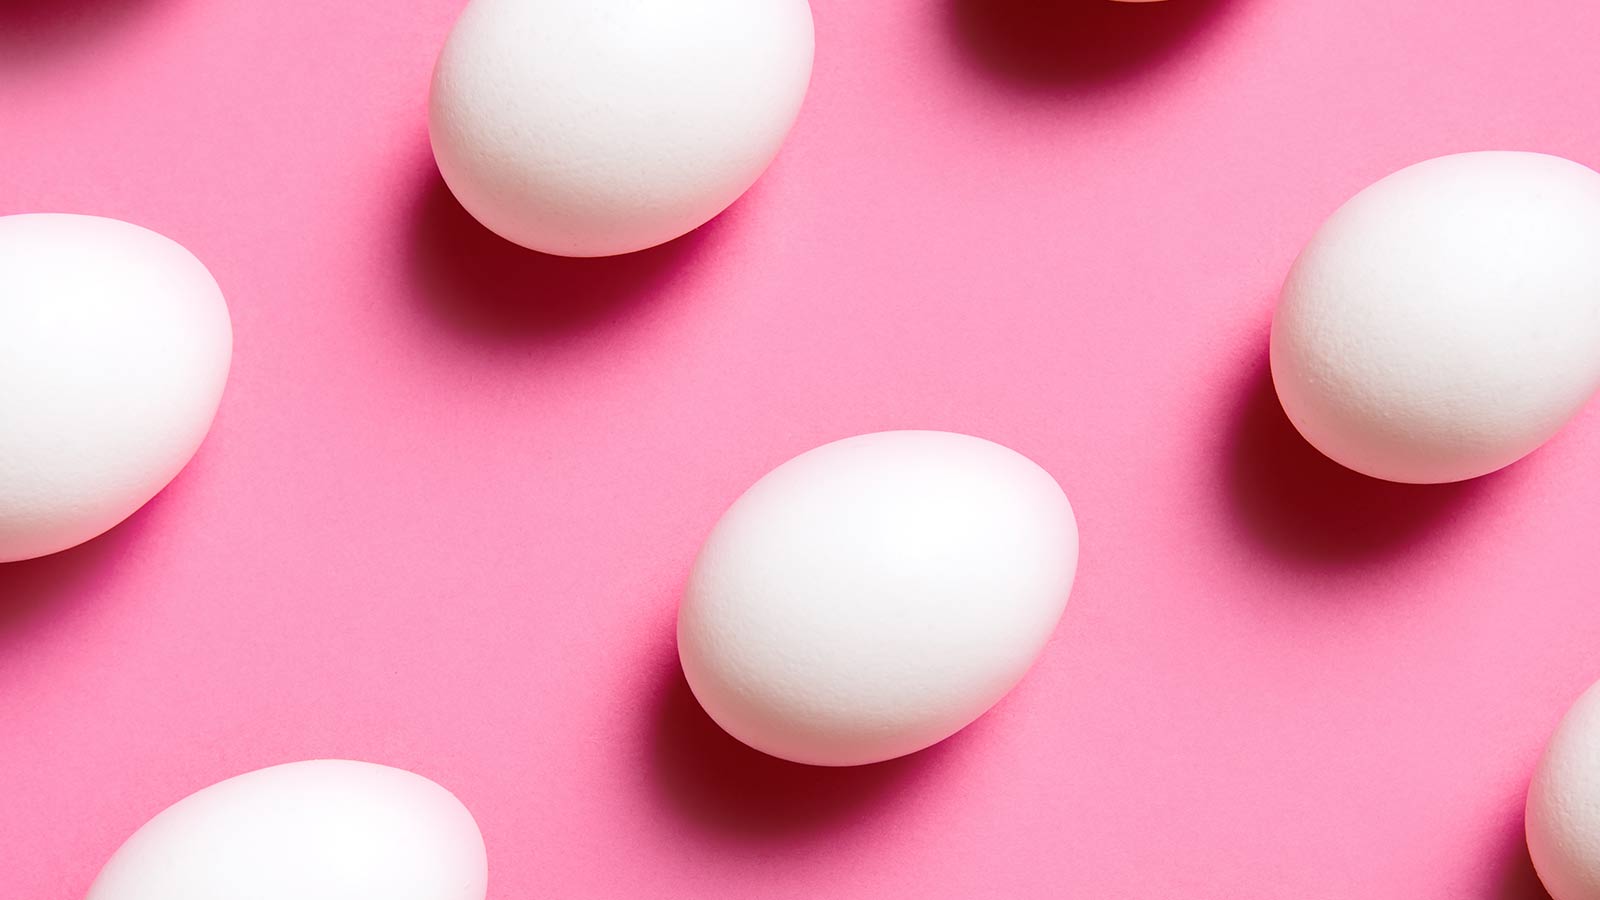 Eggs on pink background